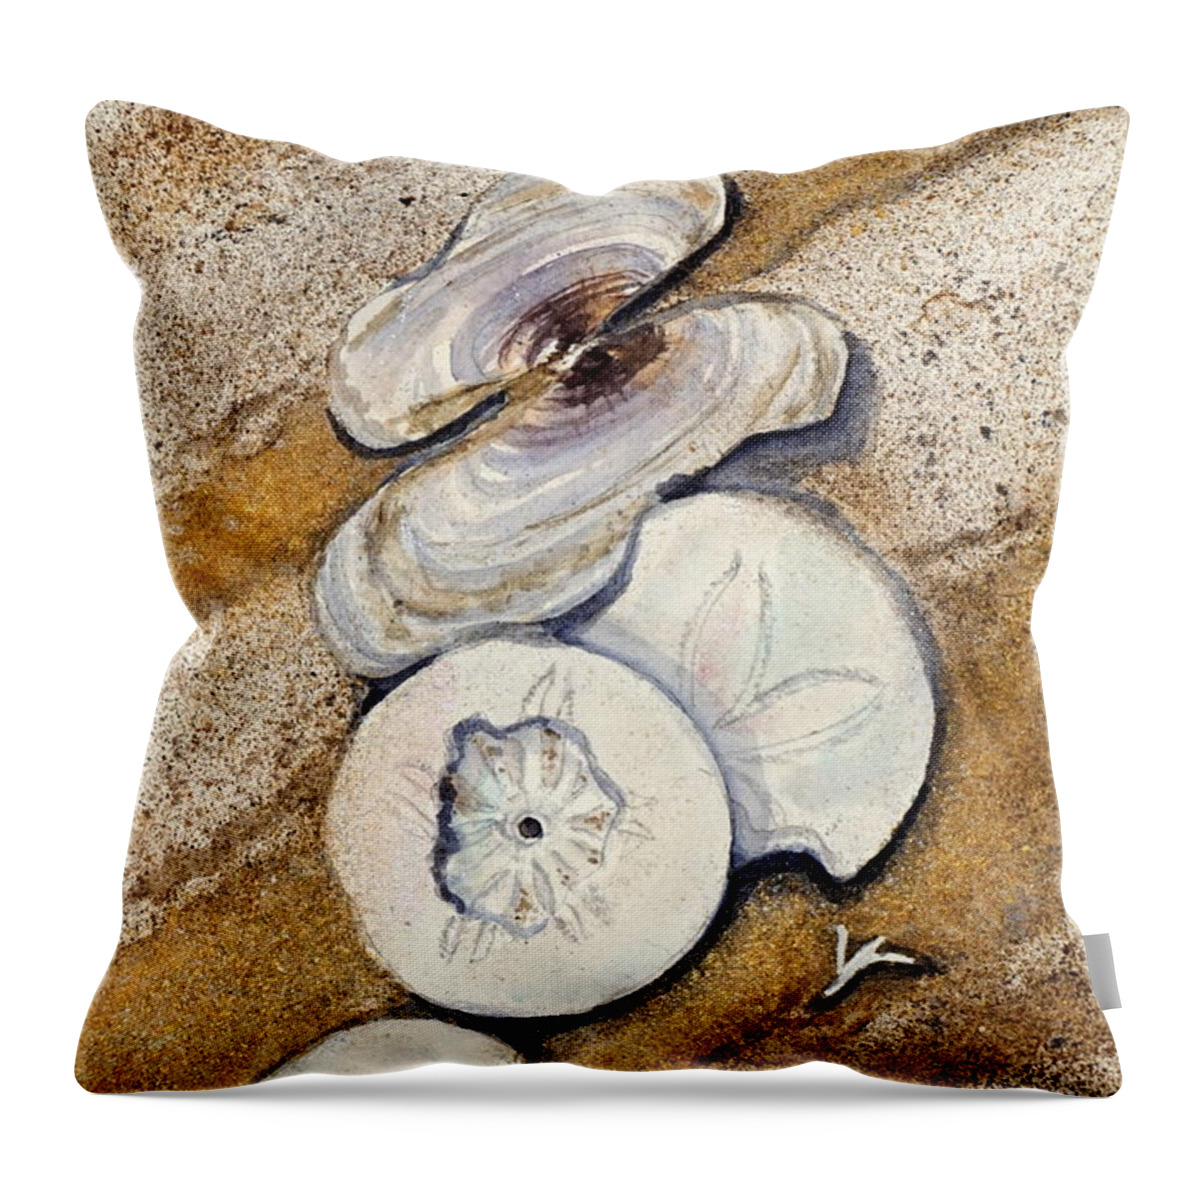 Shells Throw Pillow featuring the painting Remnants by Anna Jacke